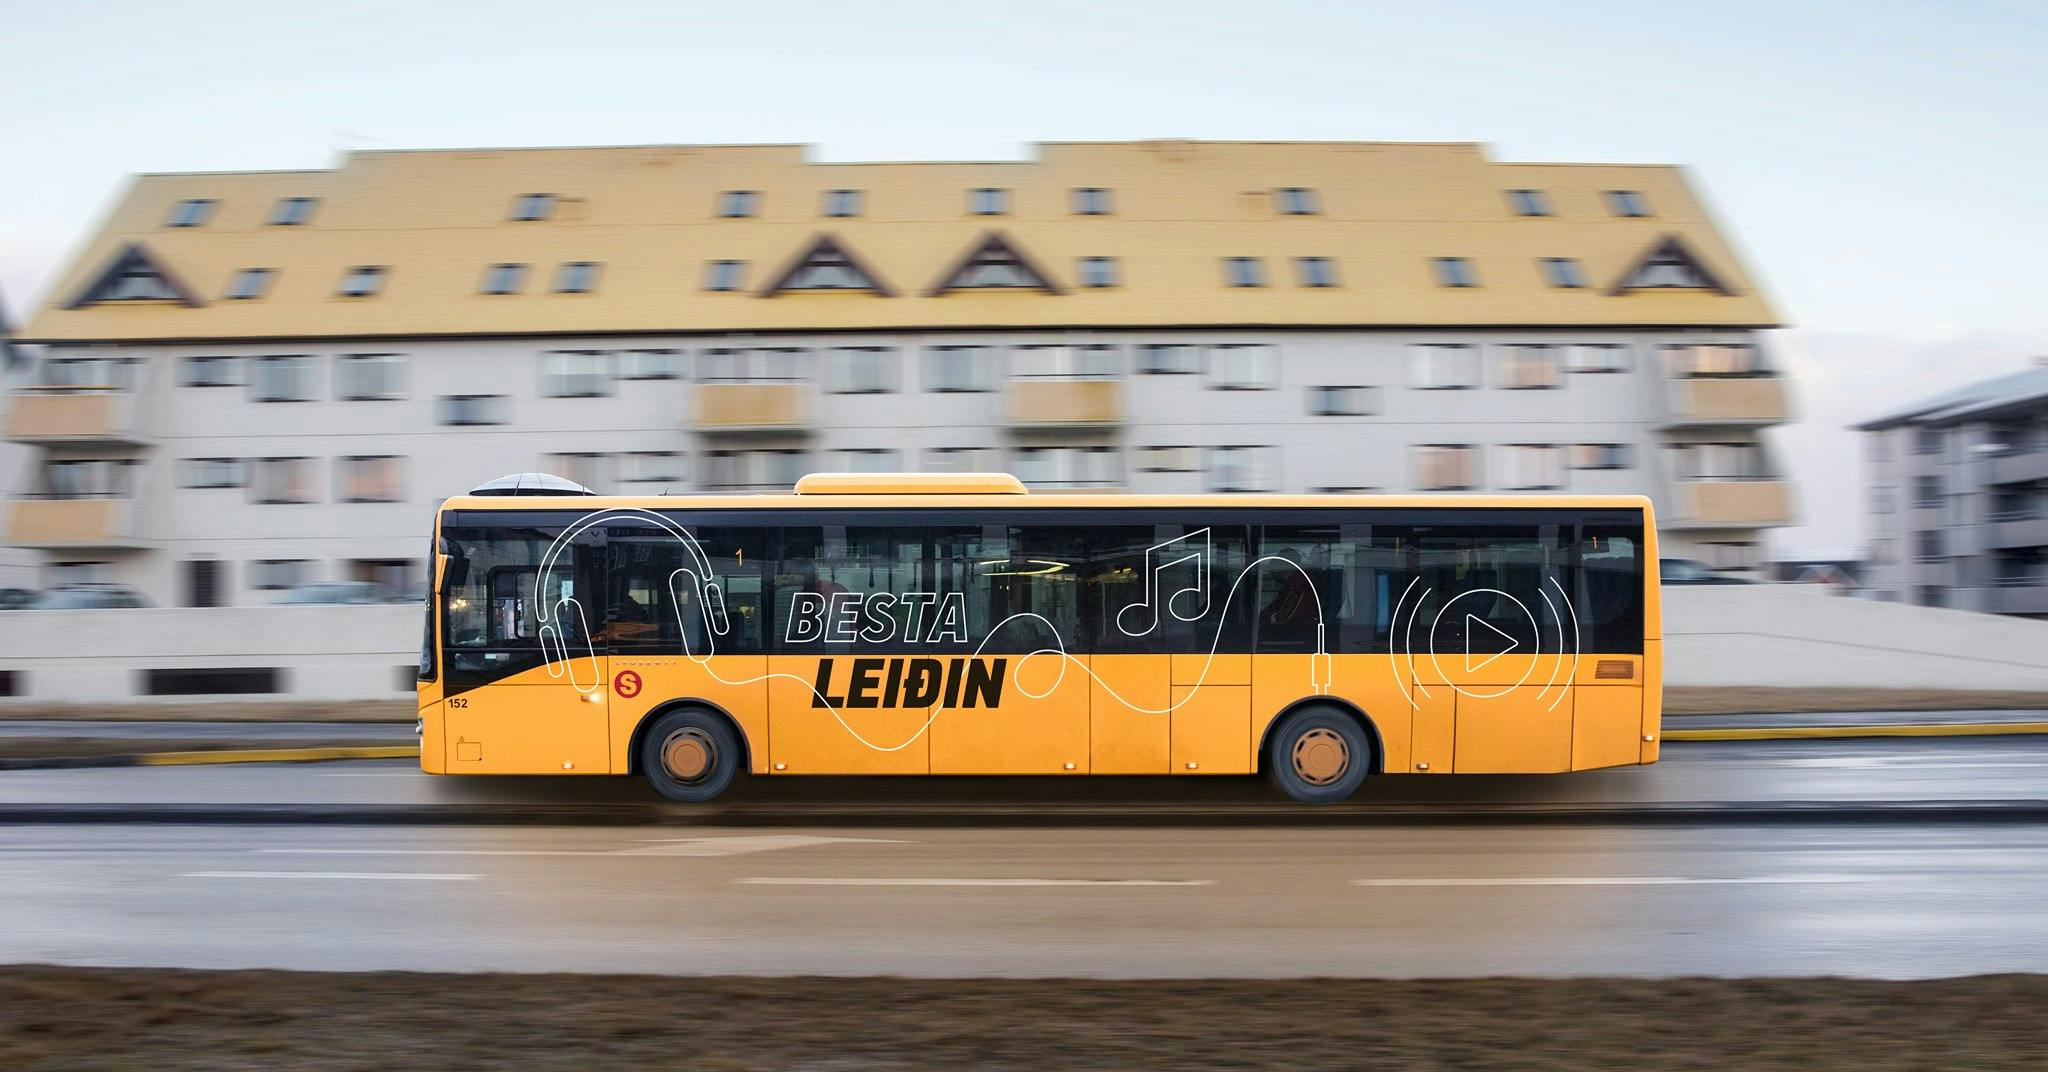 The public yellow bus in Iceland